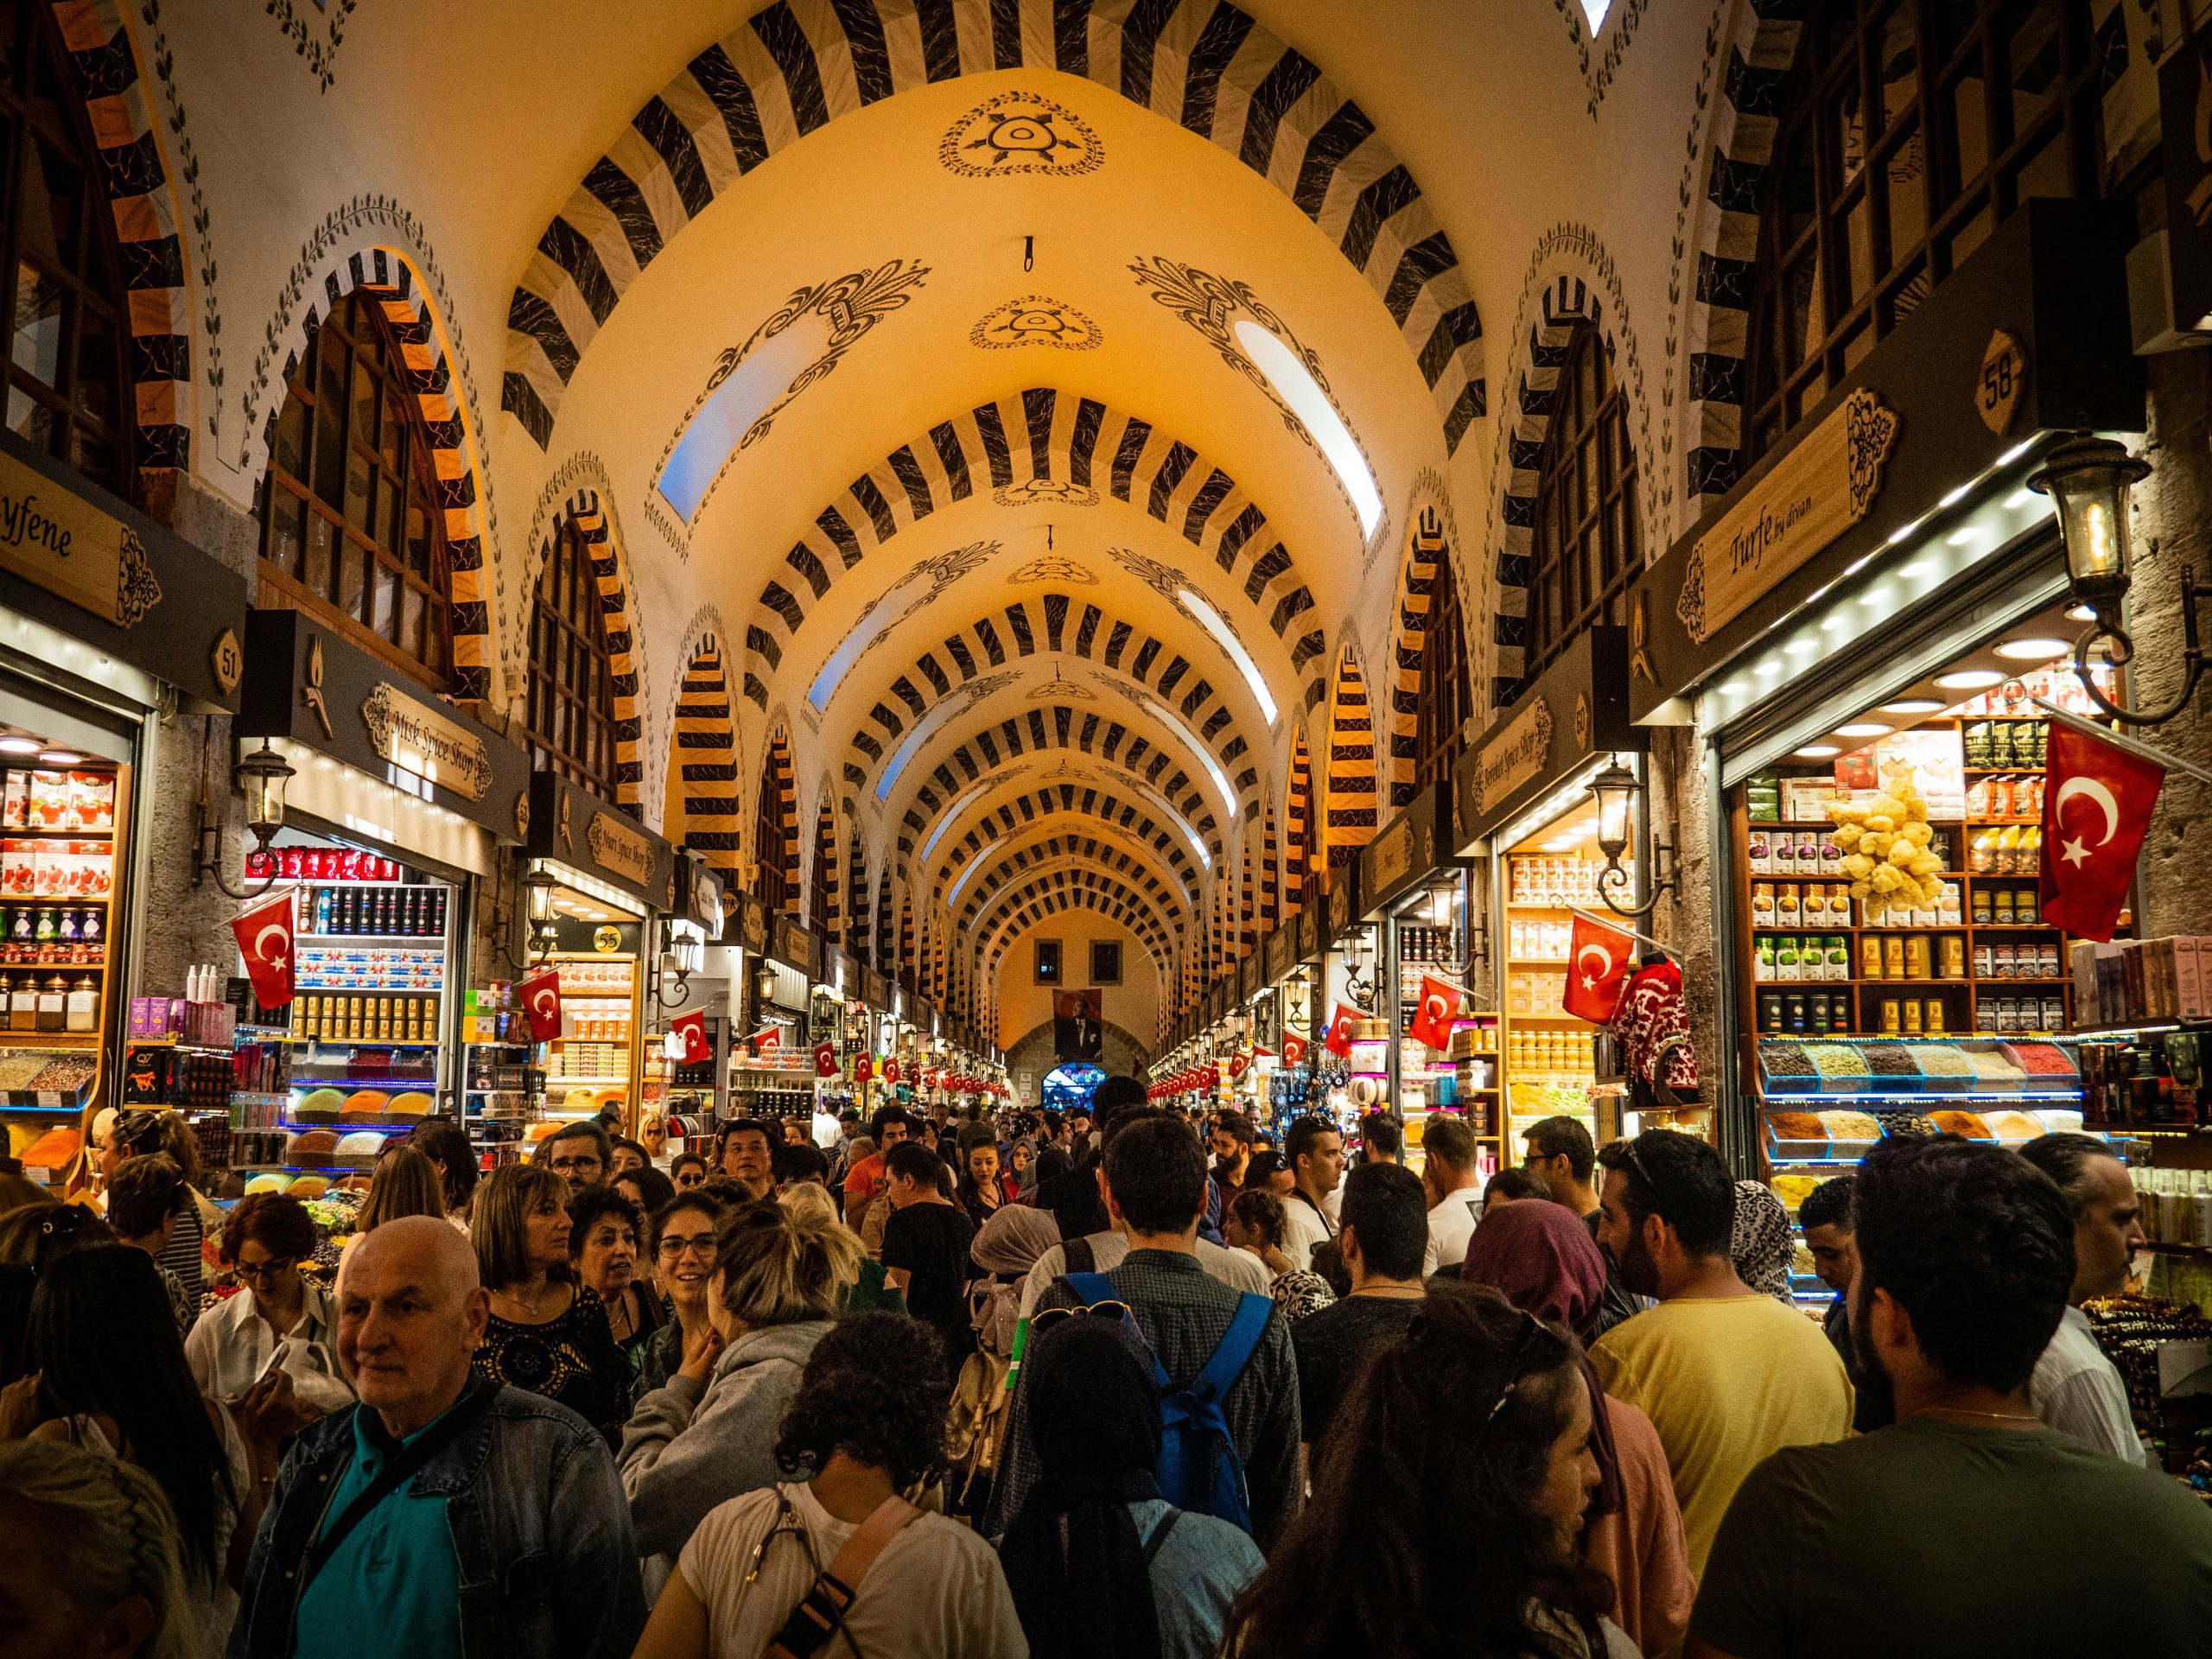 What is the atmosphere like during Ramadan in Turkey